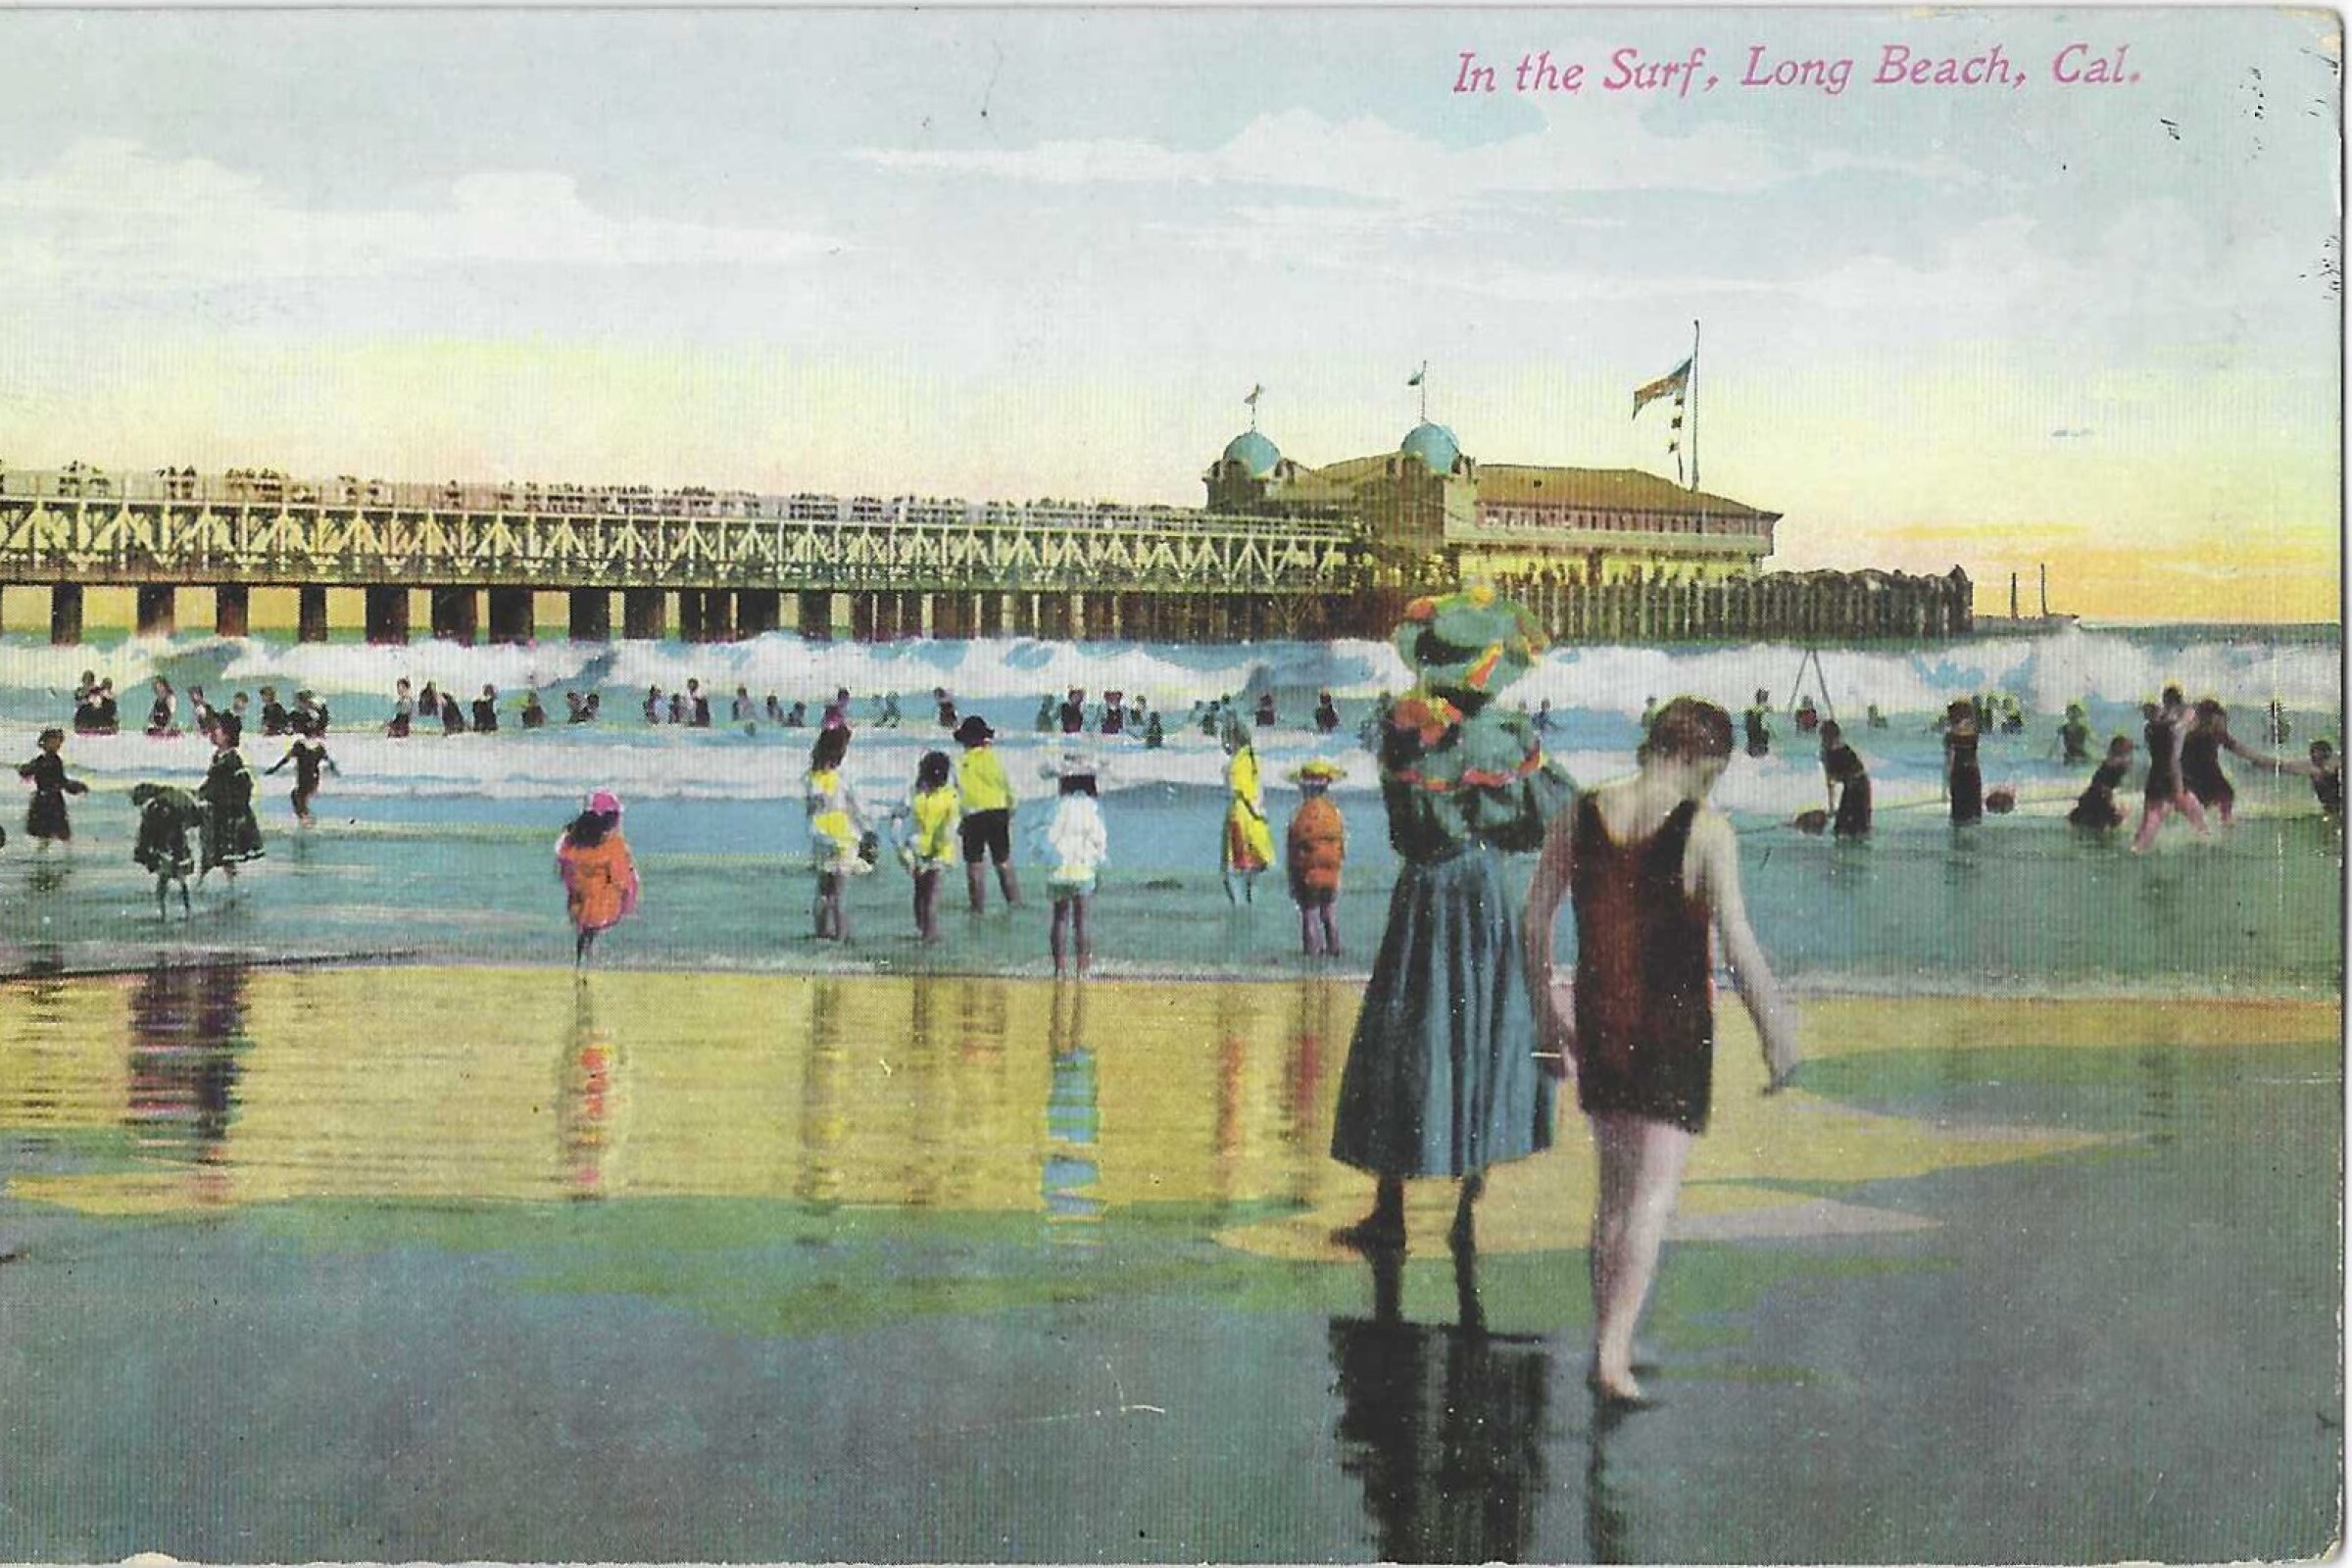 People play in the surf near a pier. Prominent in the frame is a woman in an ankle-length blue dress and a hat